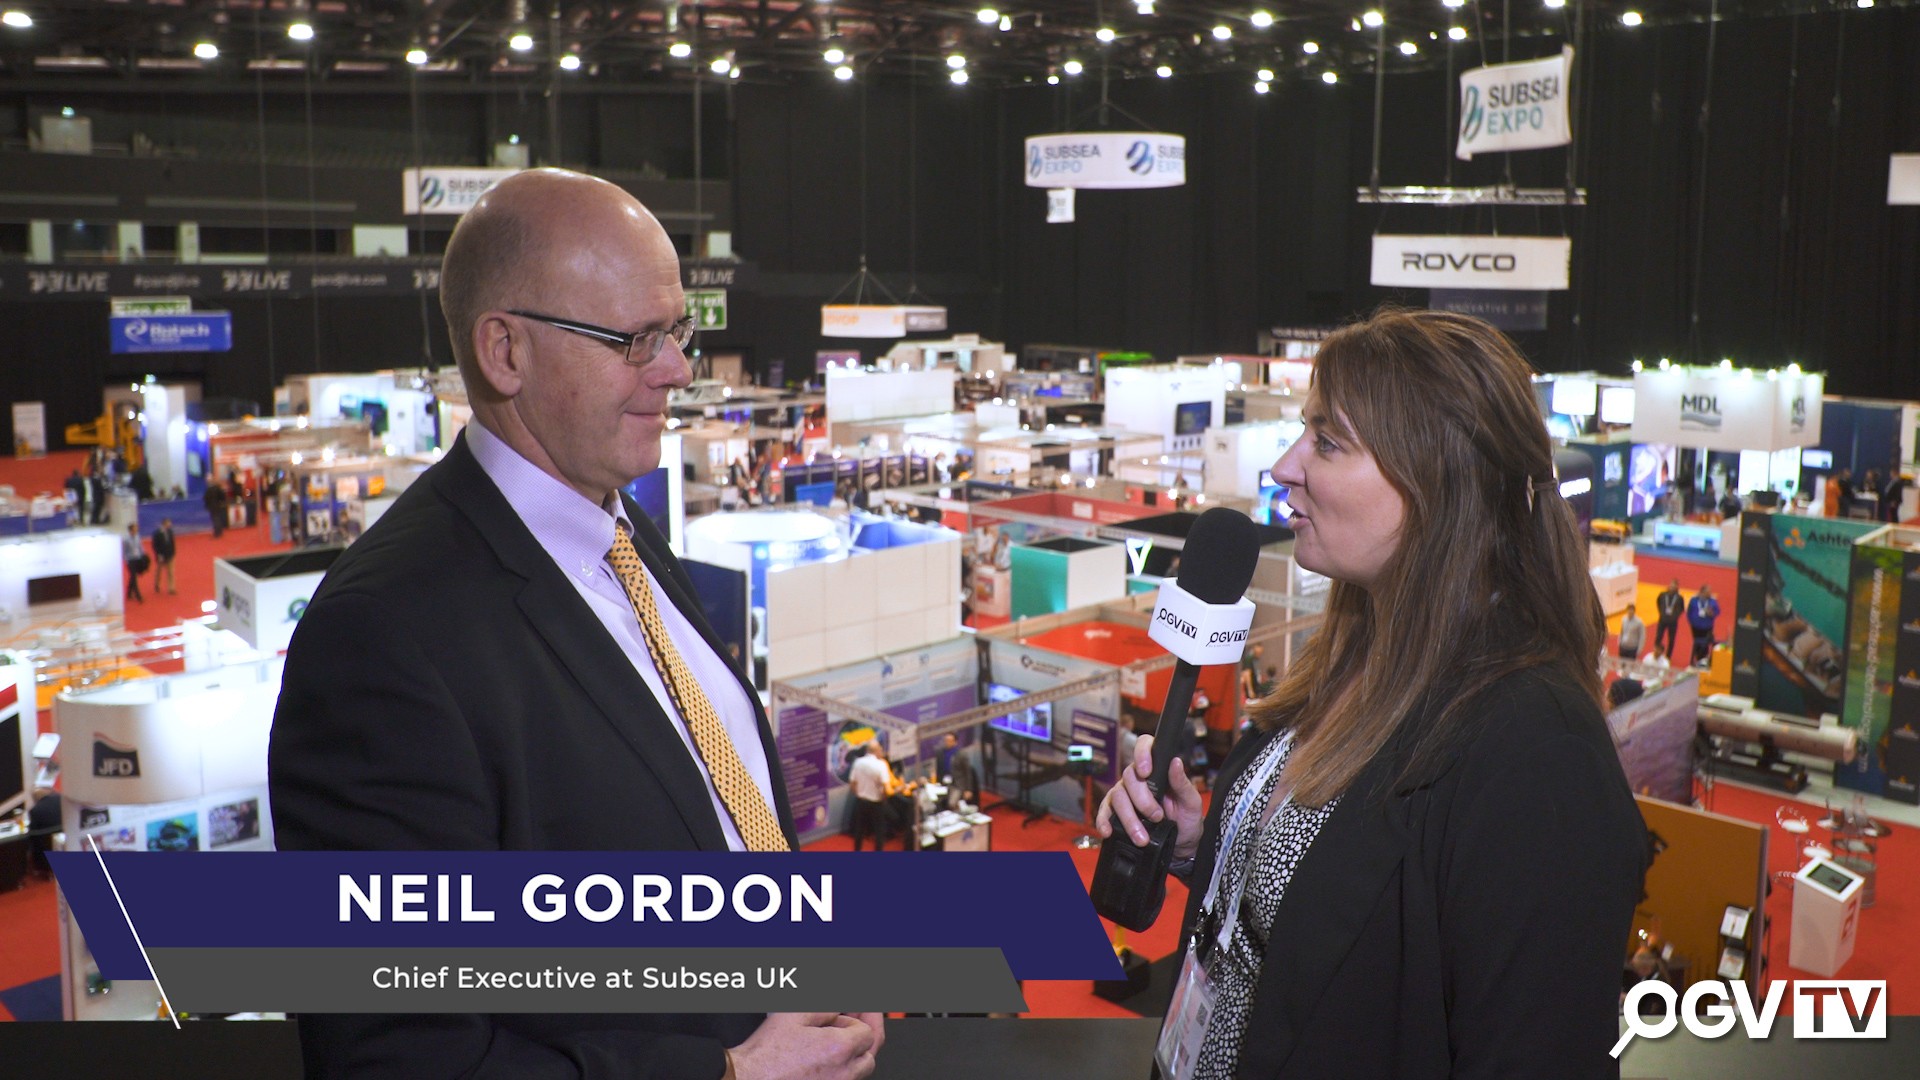 Subsea Expo 2020 - Event overview by Neil Gordon, Chief Executive at Subsea UK